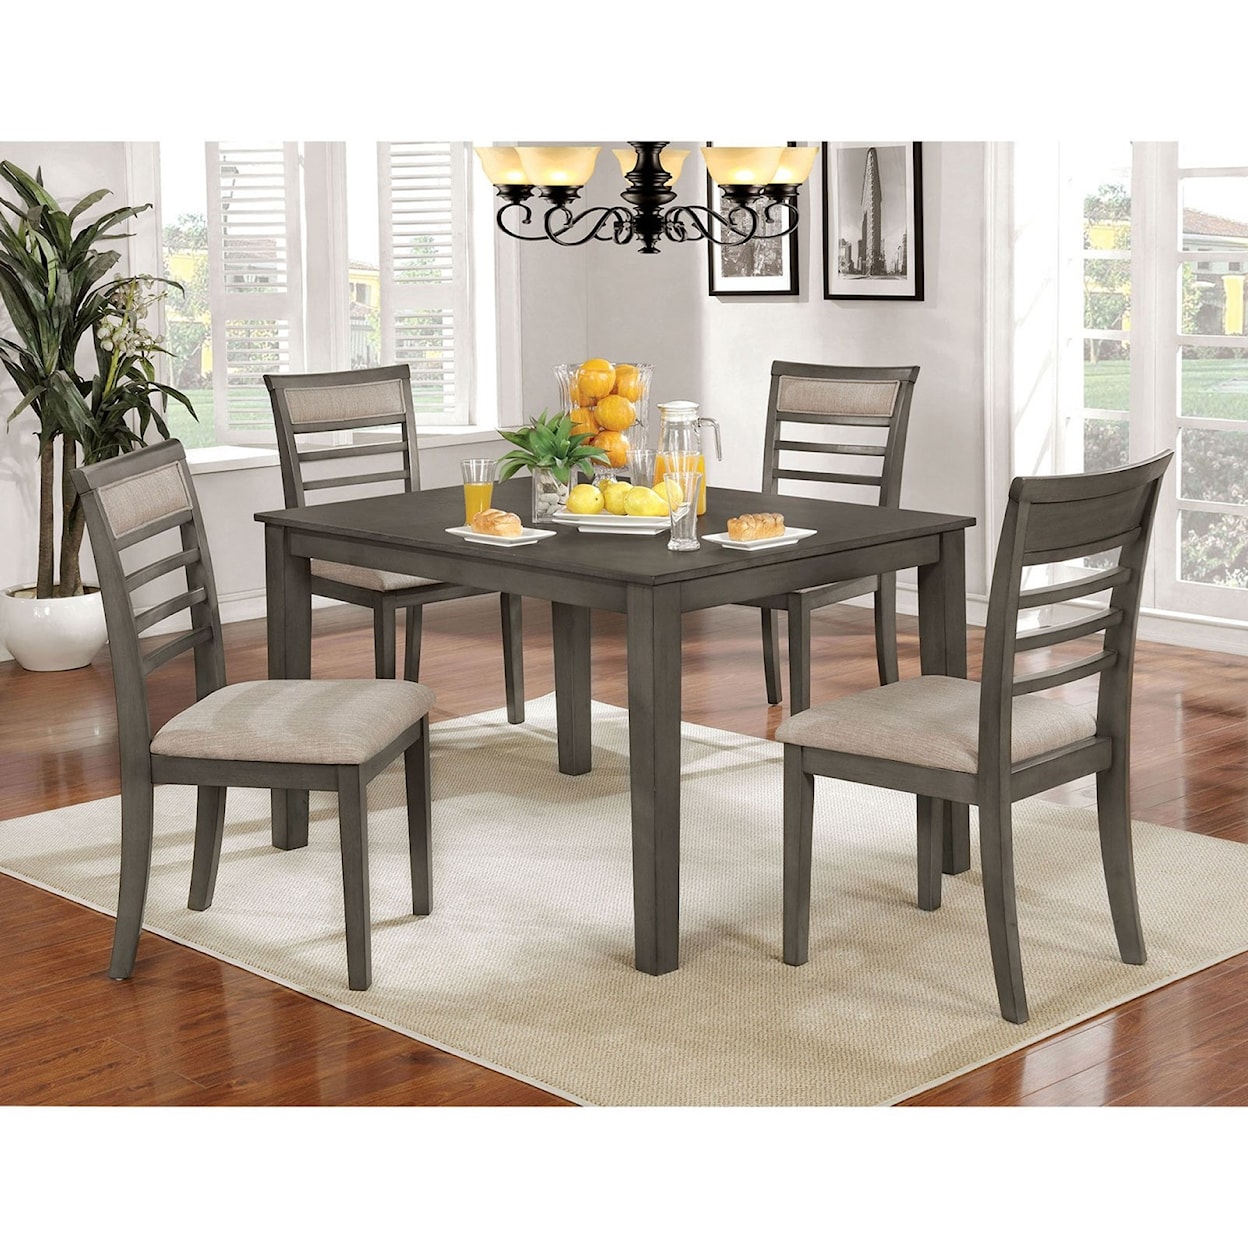 Furniture of America Fafnir 5 Piece Table and Chair Set